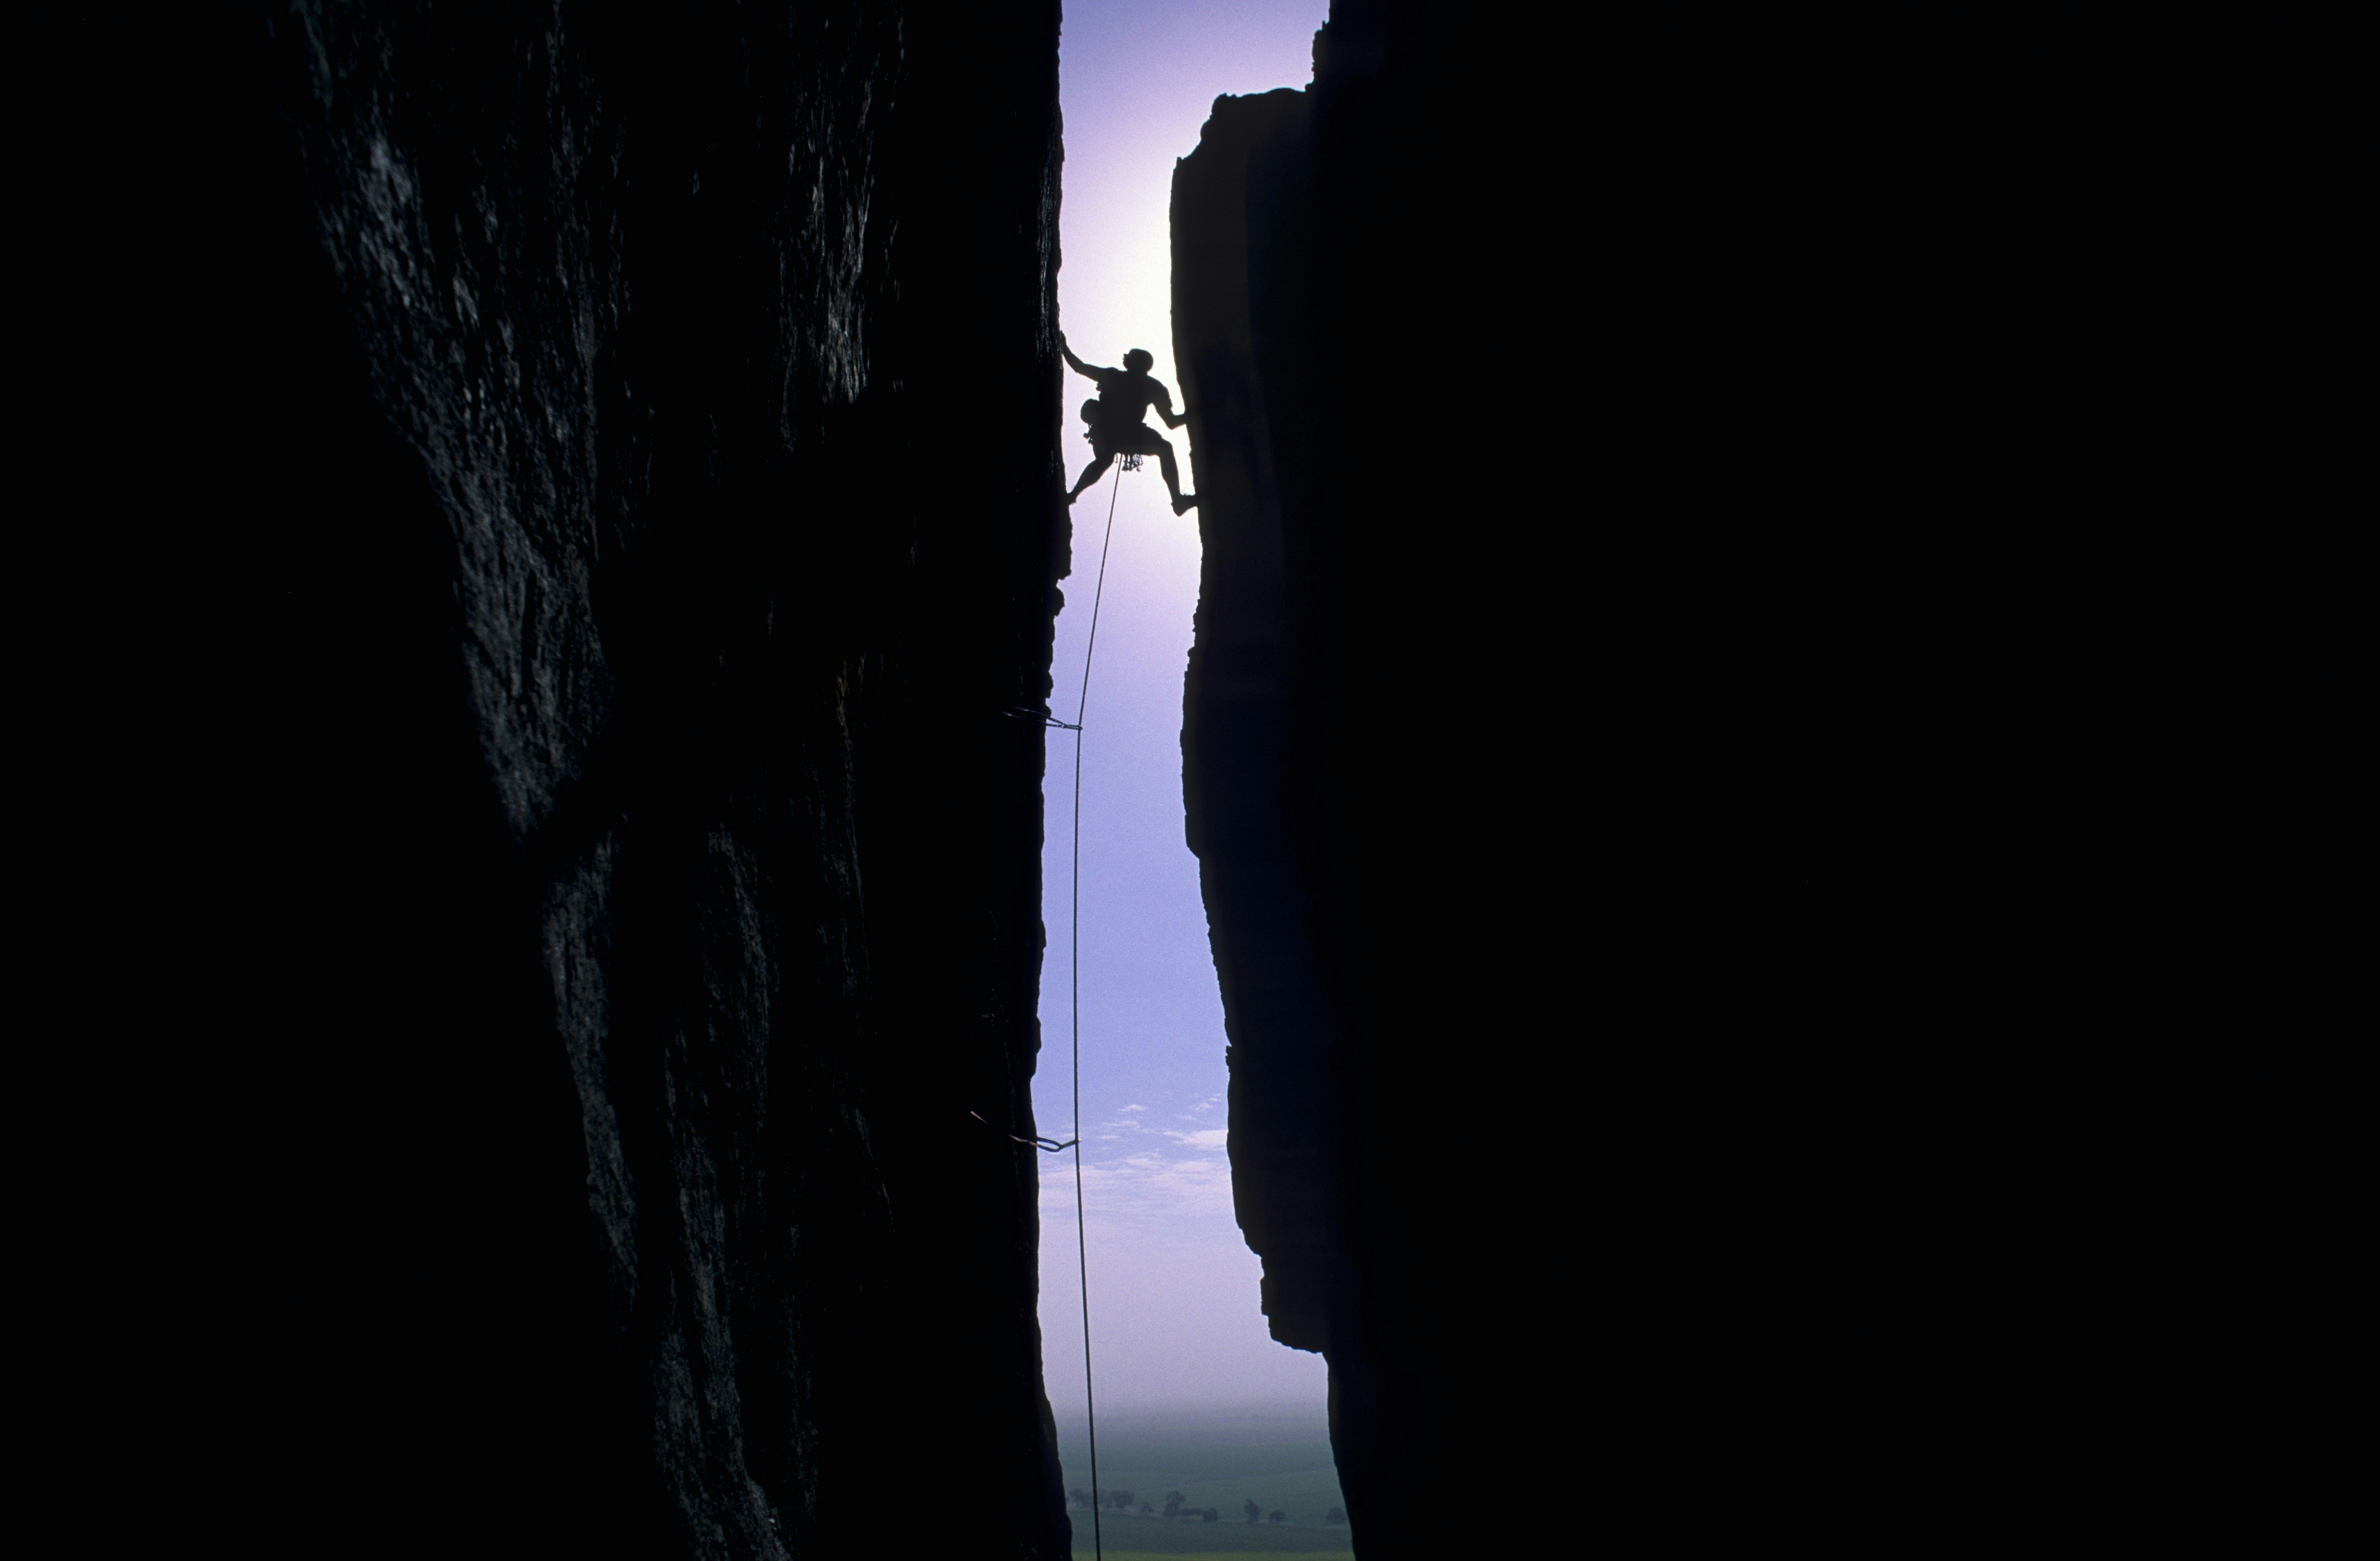 Silhouette of man rock against a purple sky; he is wedged between two vertical cliff faces that are also silhouetted.